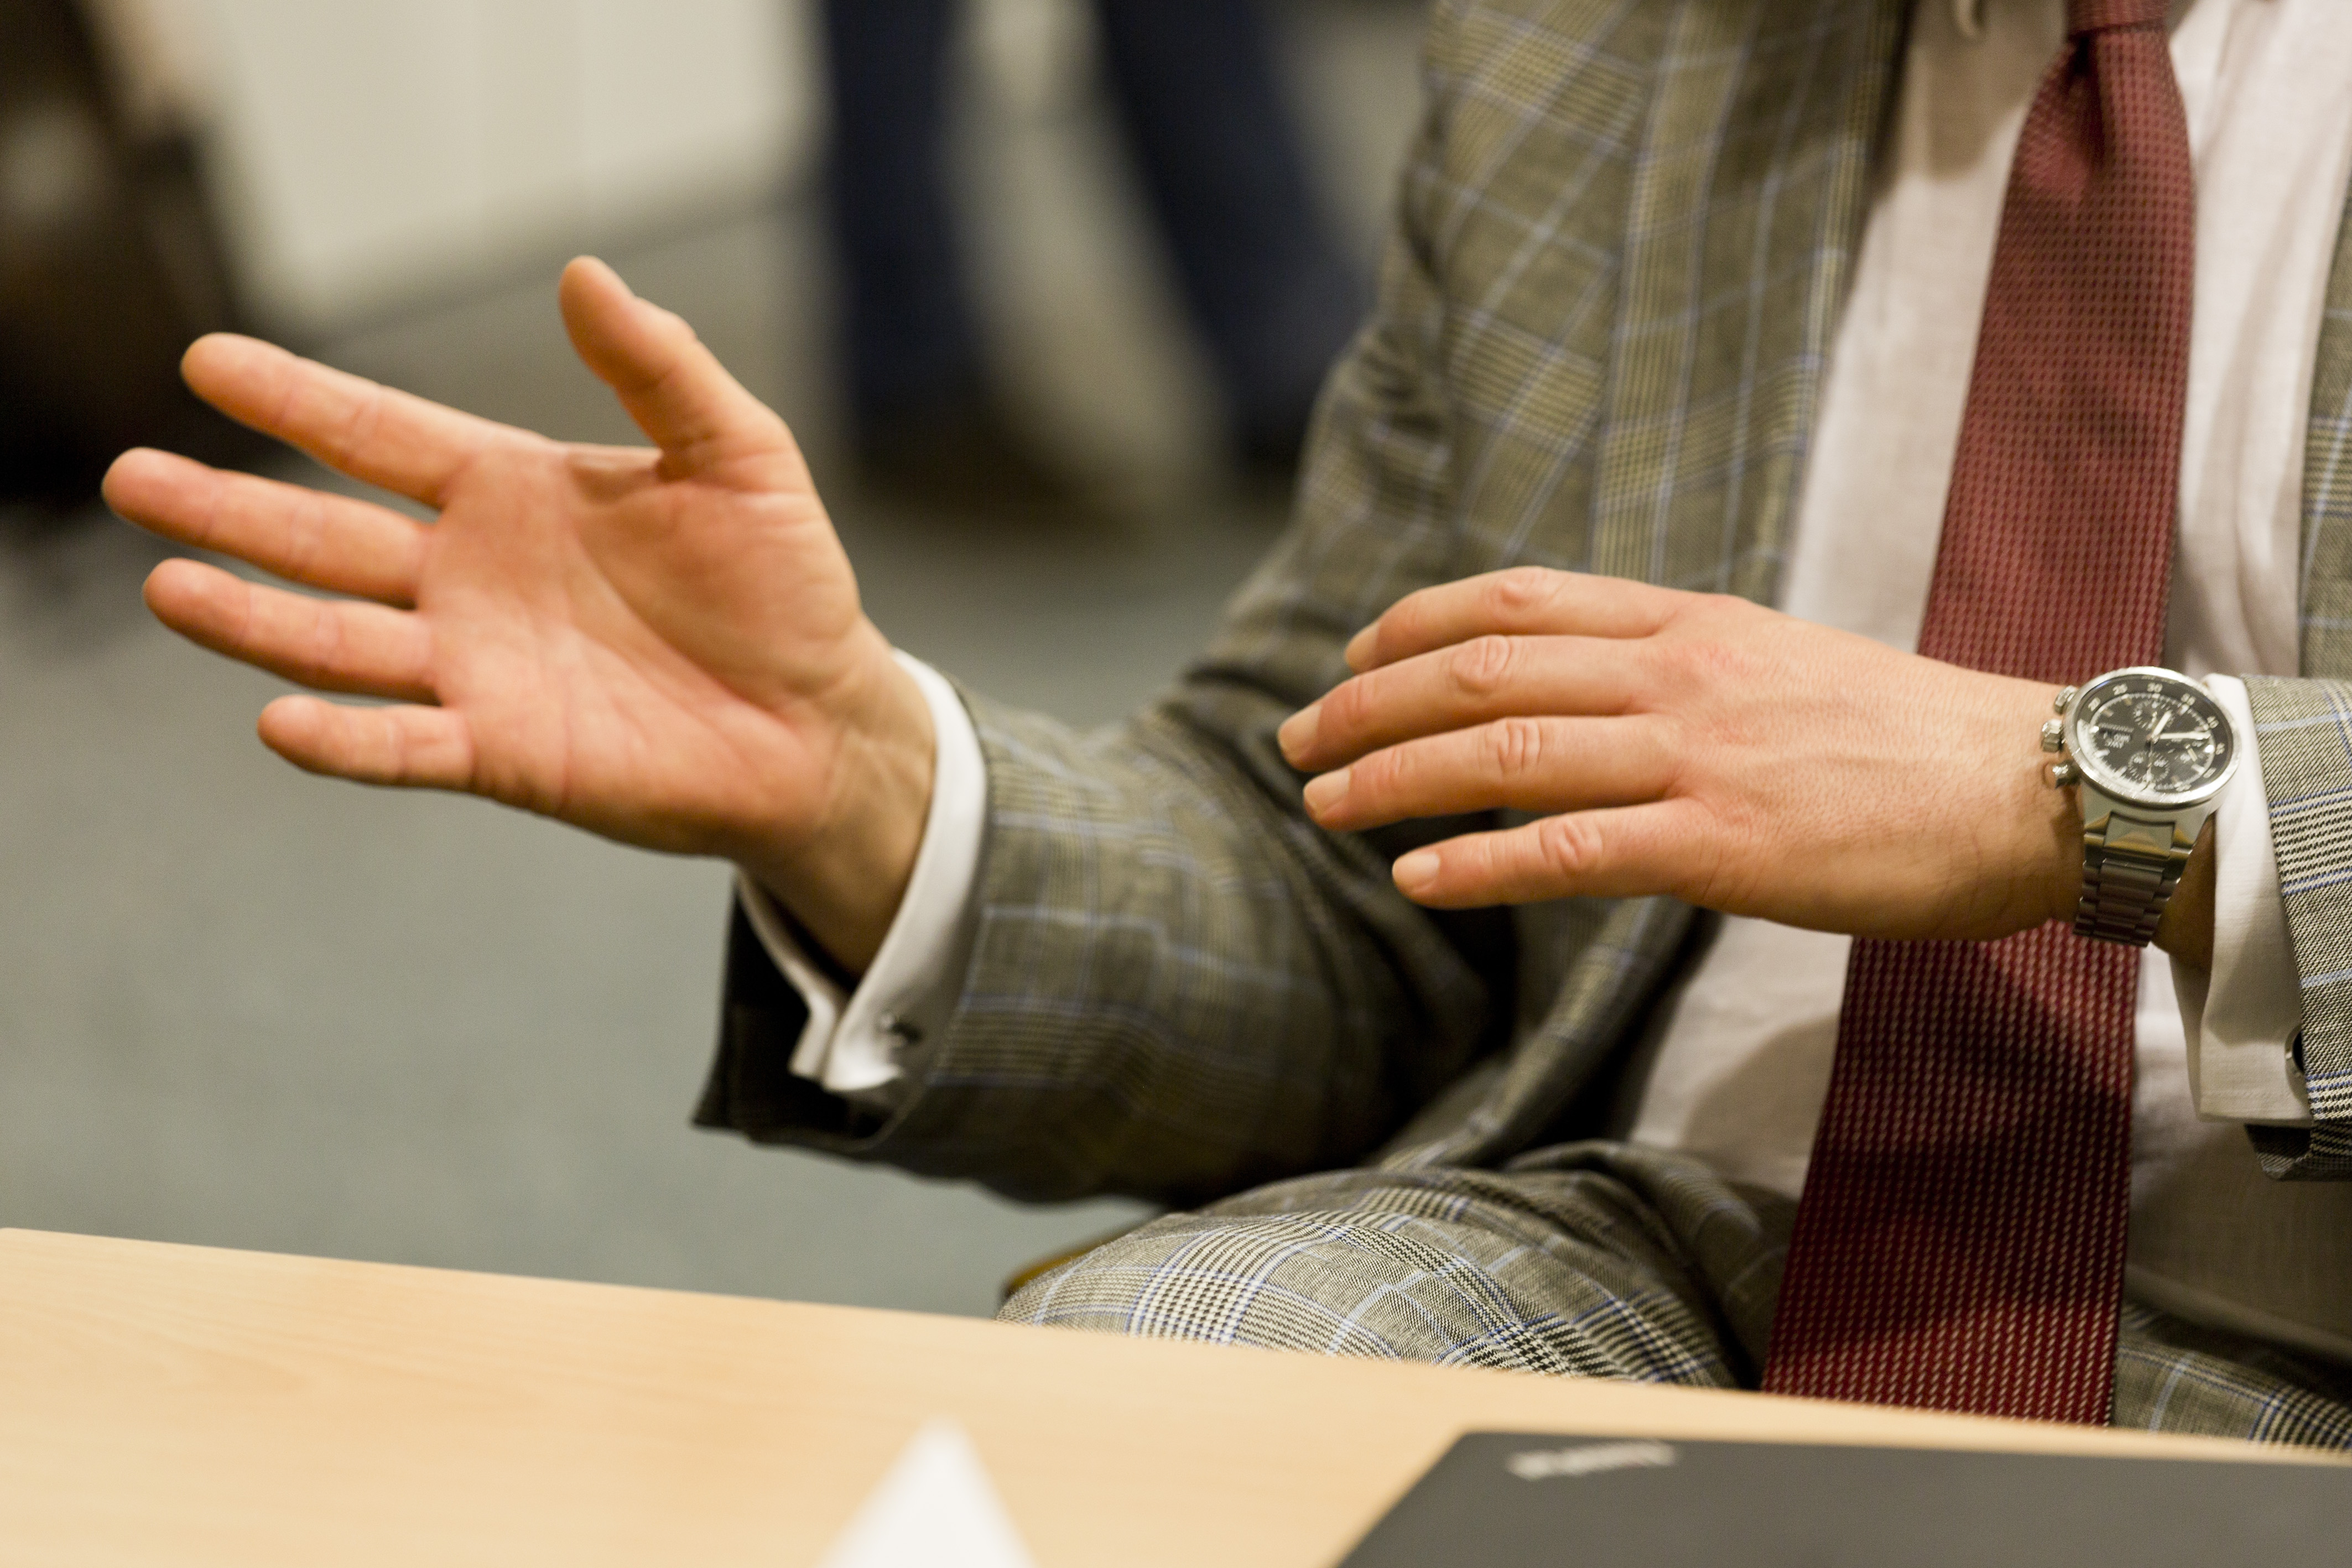 A picture of the hands during a discussion